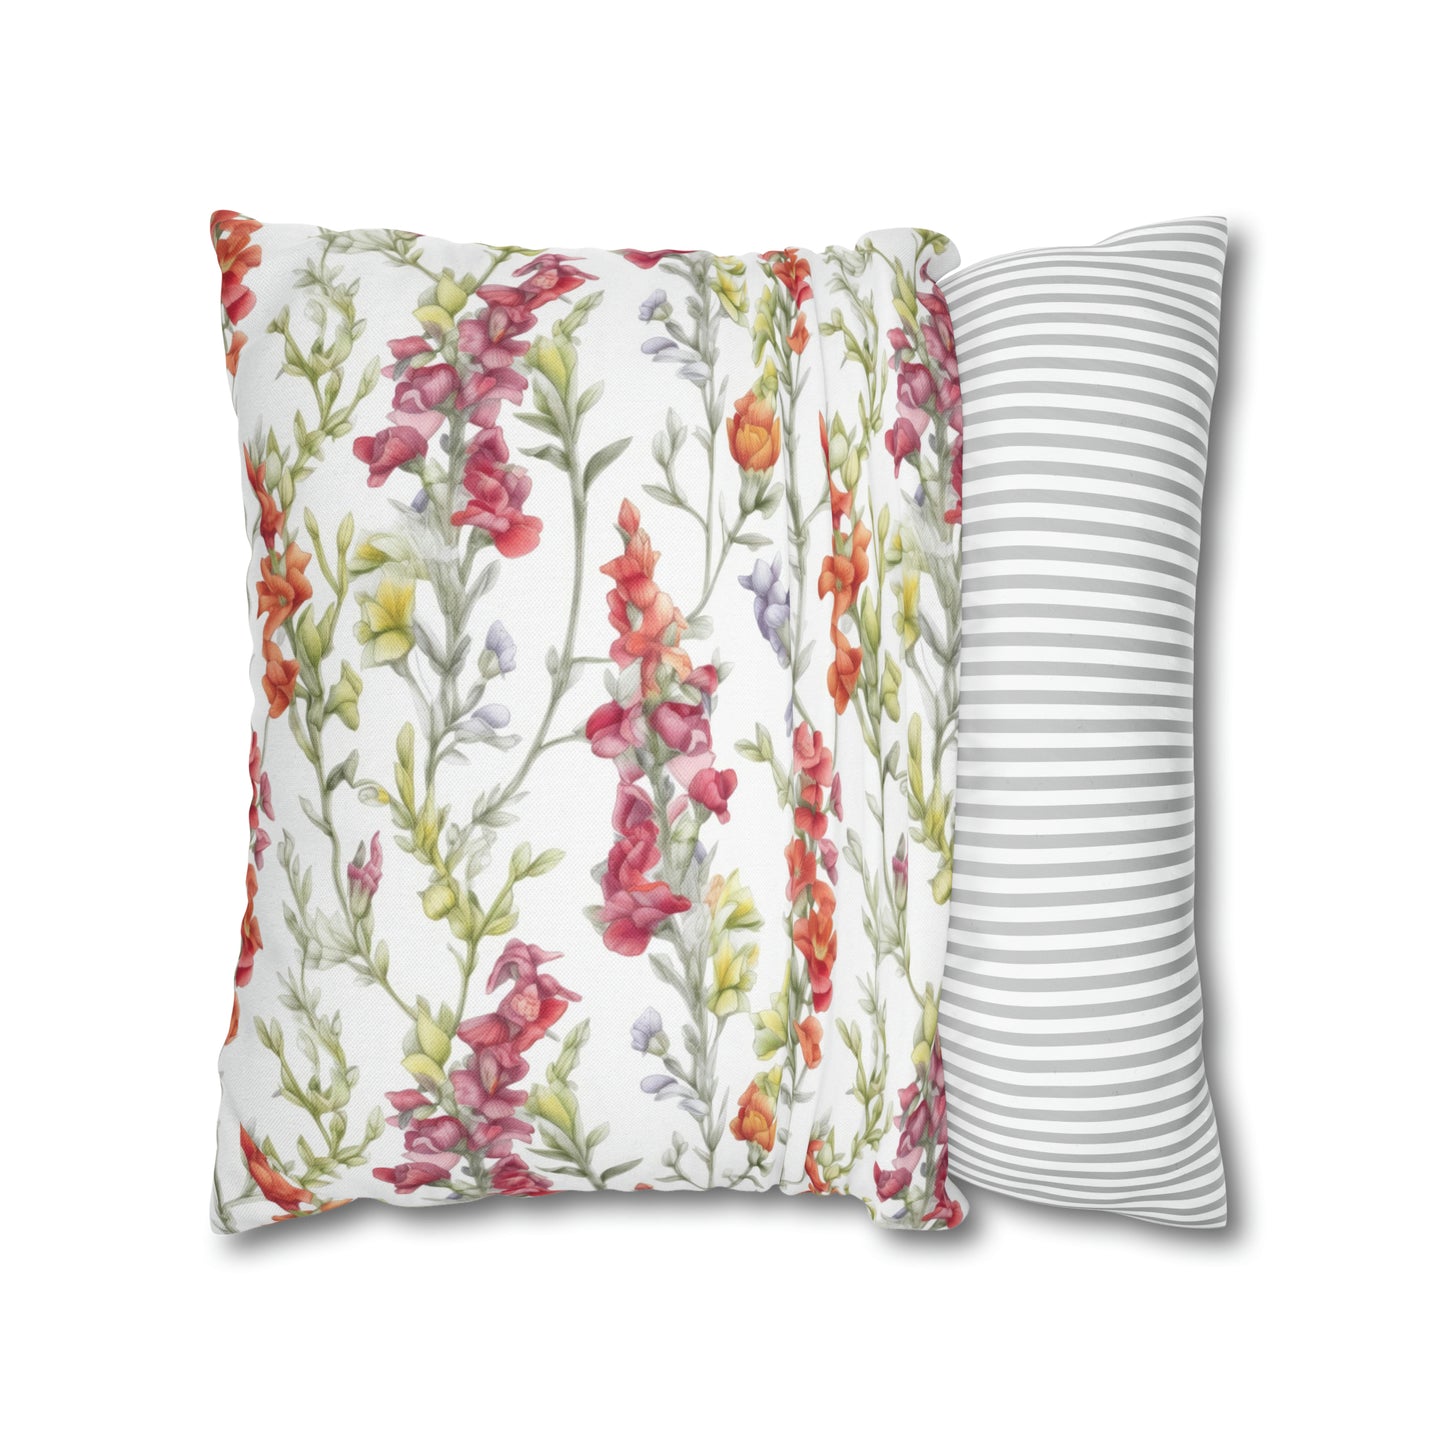 Snapdragons Square Pillow Case